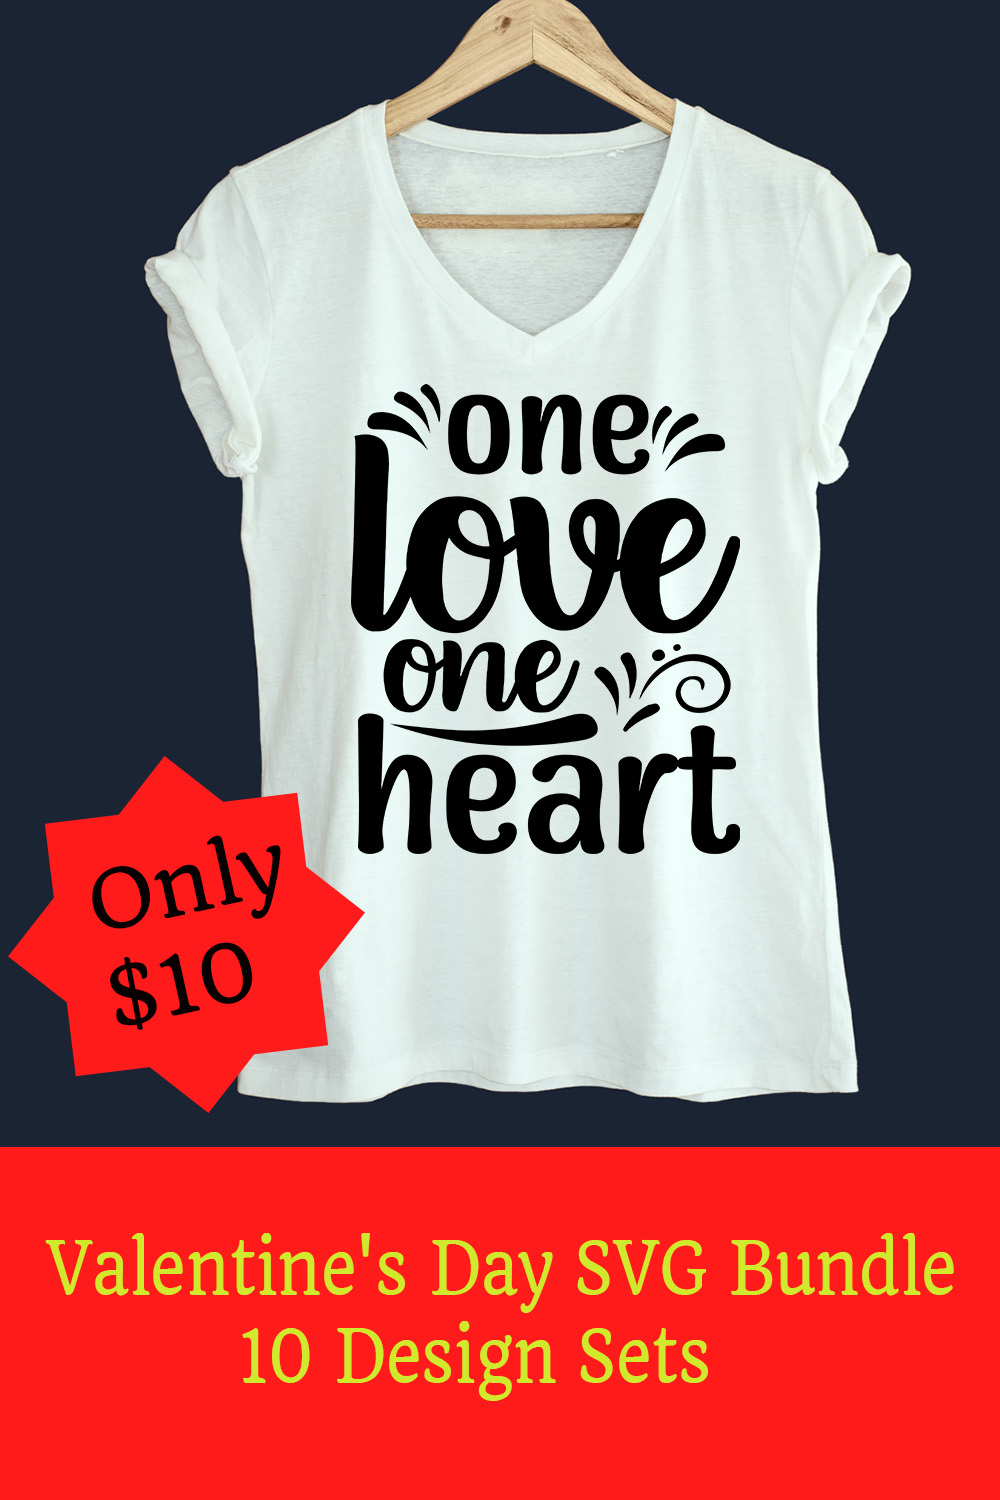 Image of a white t-shirt with a gorgeous inscription One love one heart